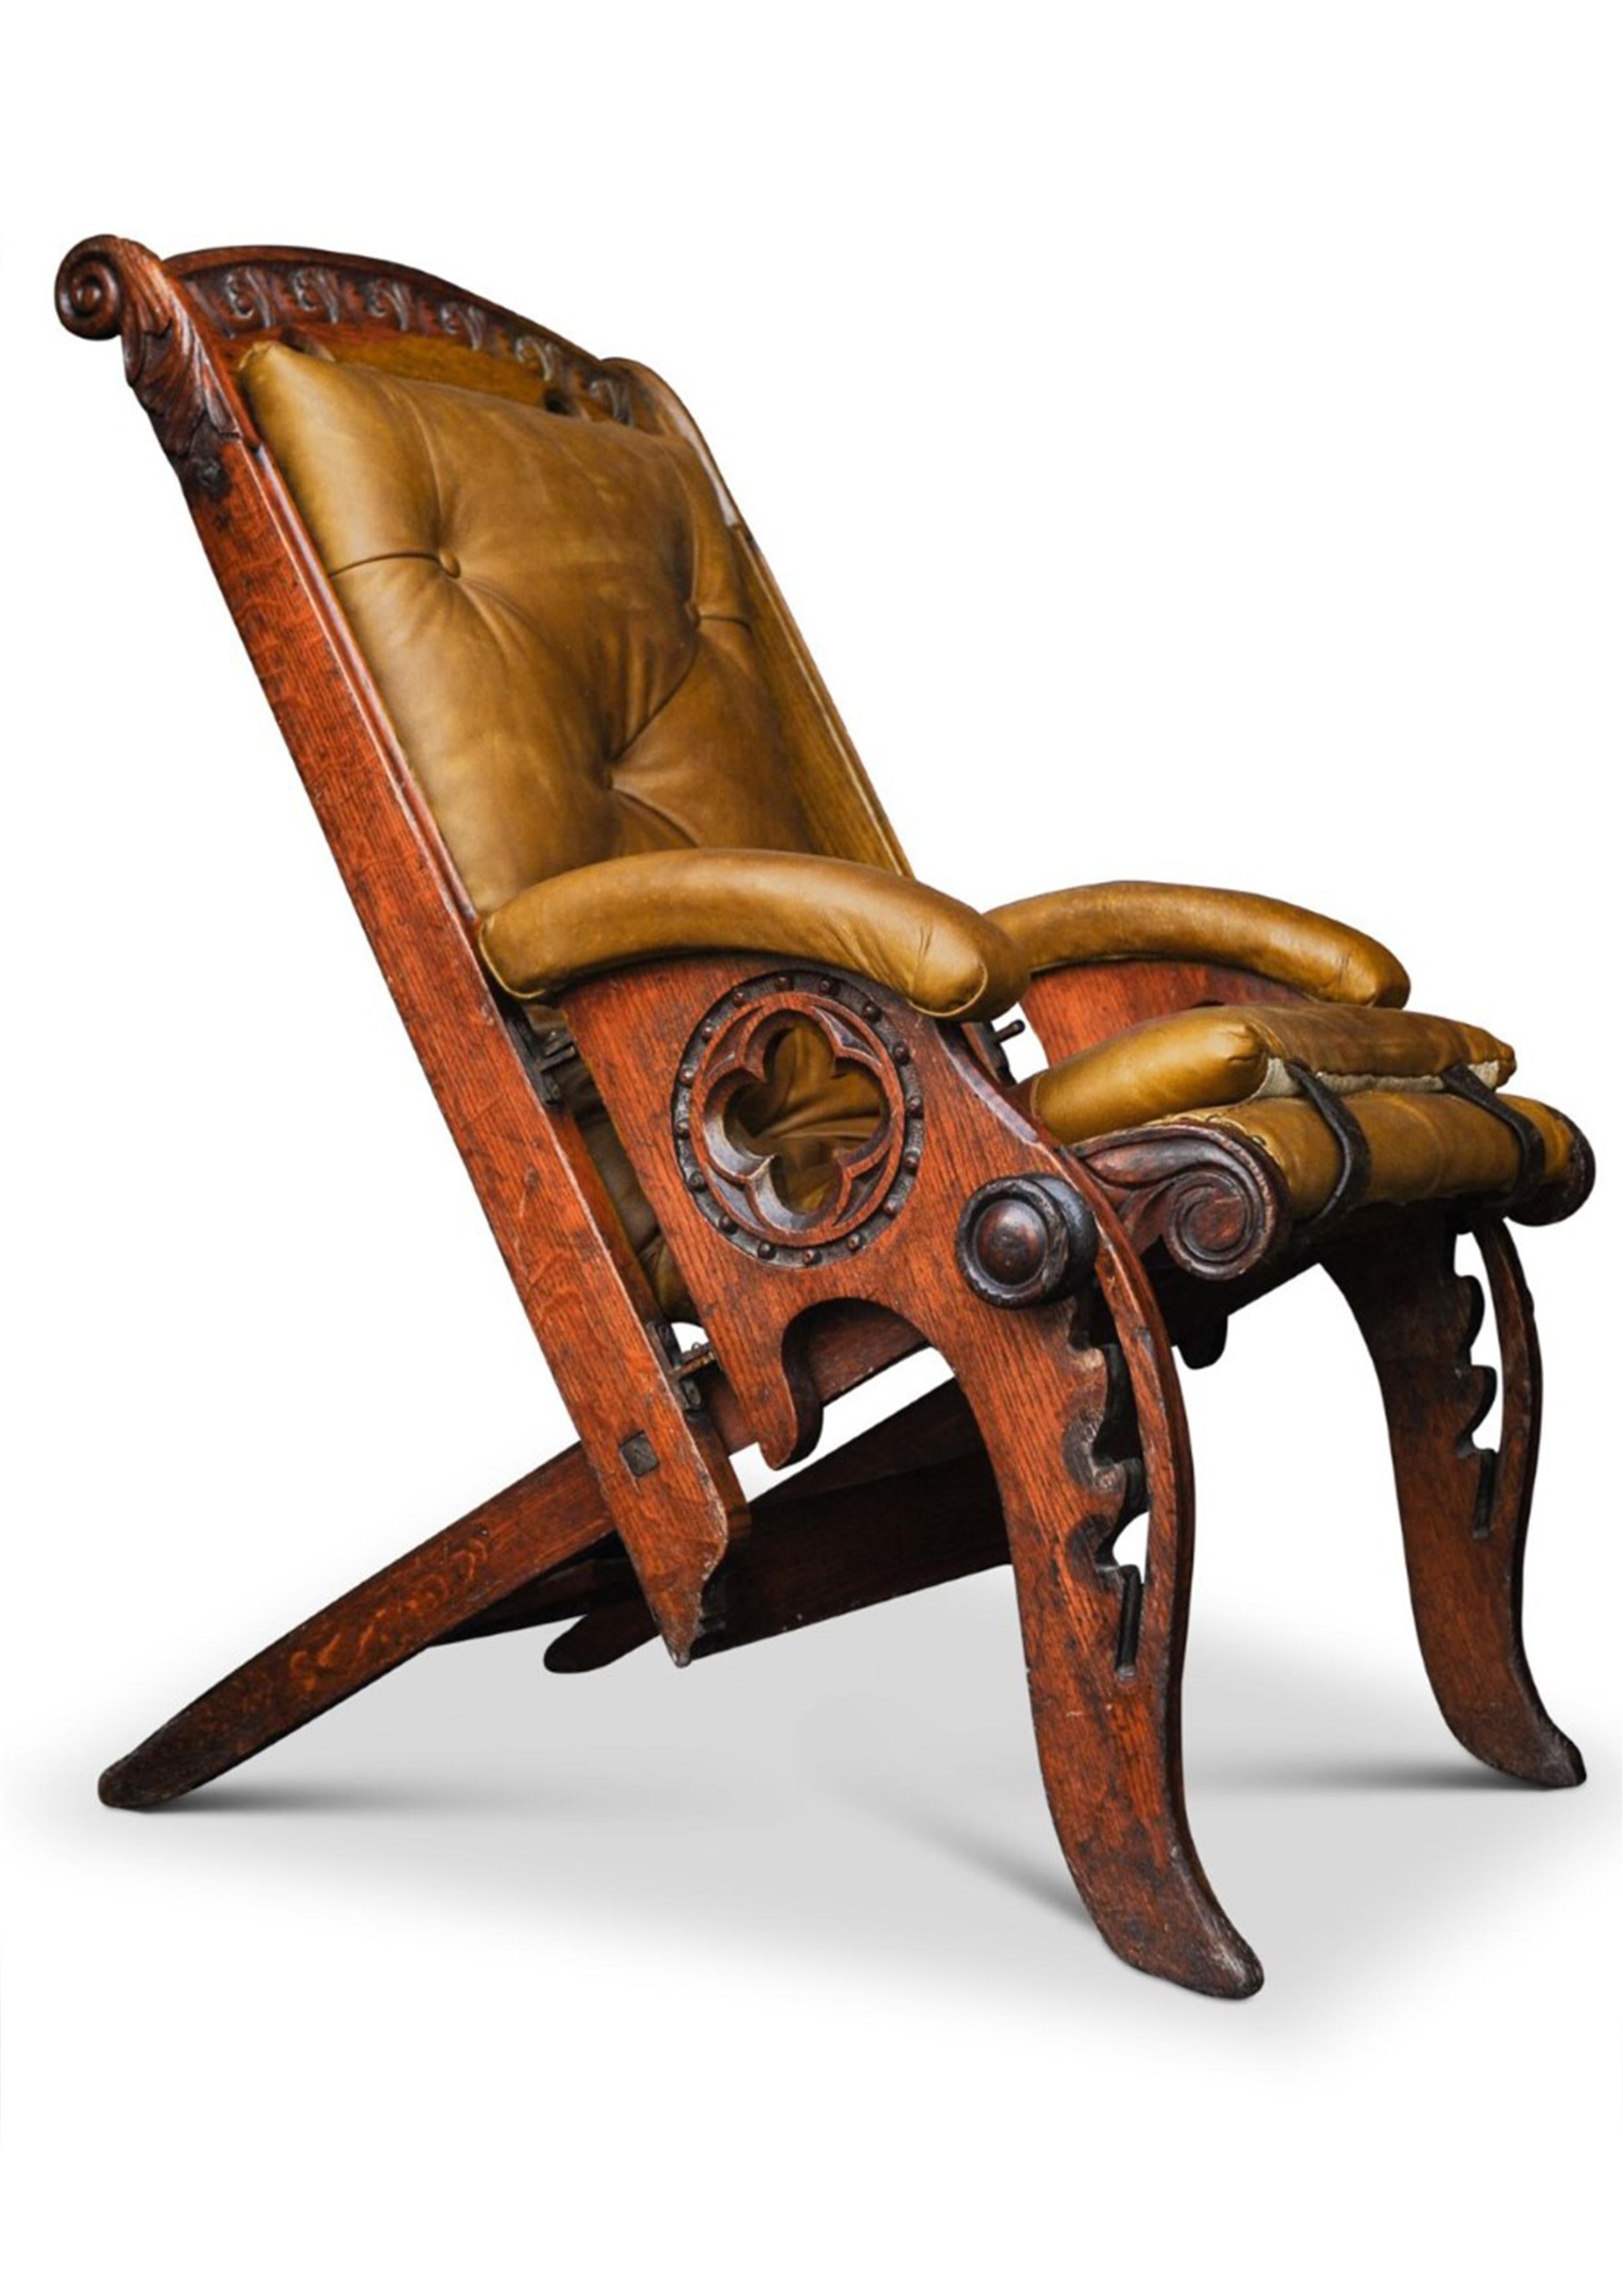 A 19th century Campaign chair of Herbert McNair Design carved oak & polished tan leather adjustable reclining seat.


James Herbert MacNair (23 December 1868 – 22 April 1955), was a Scottish artist, designer and teacher whose work contributed to